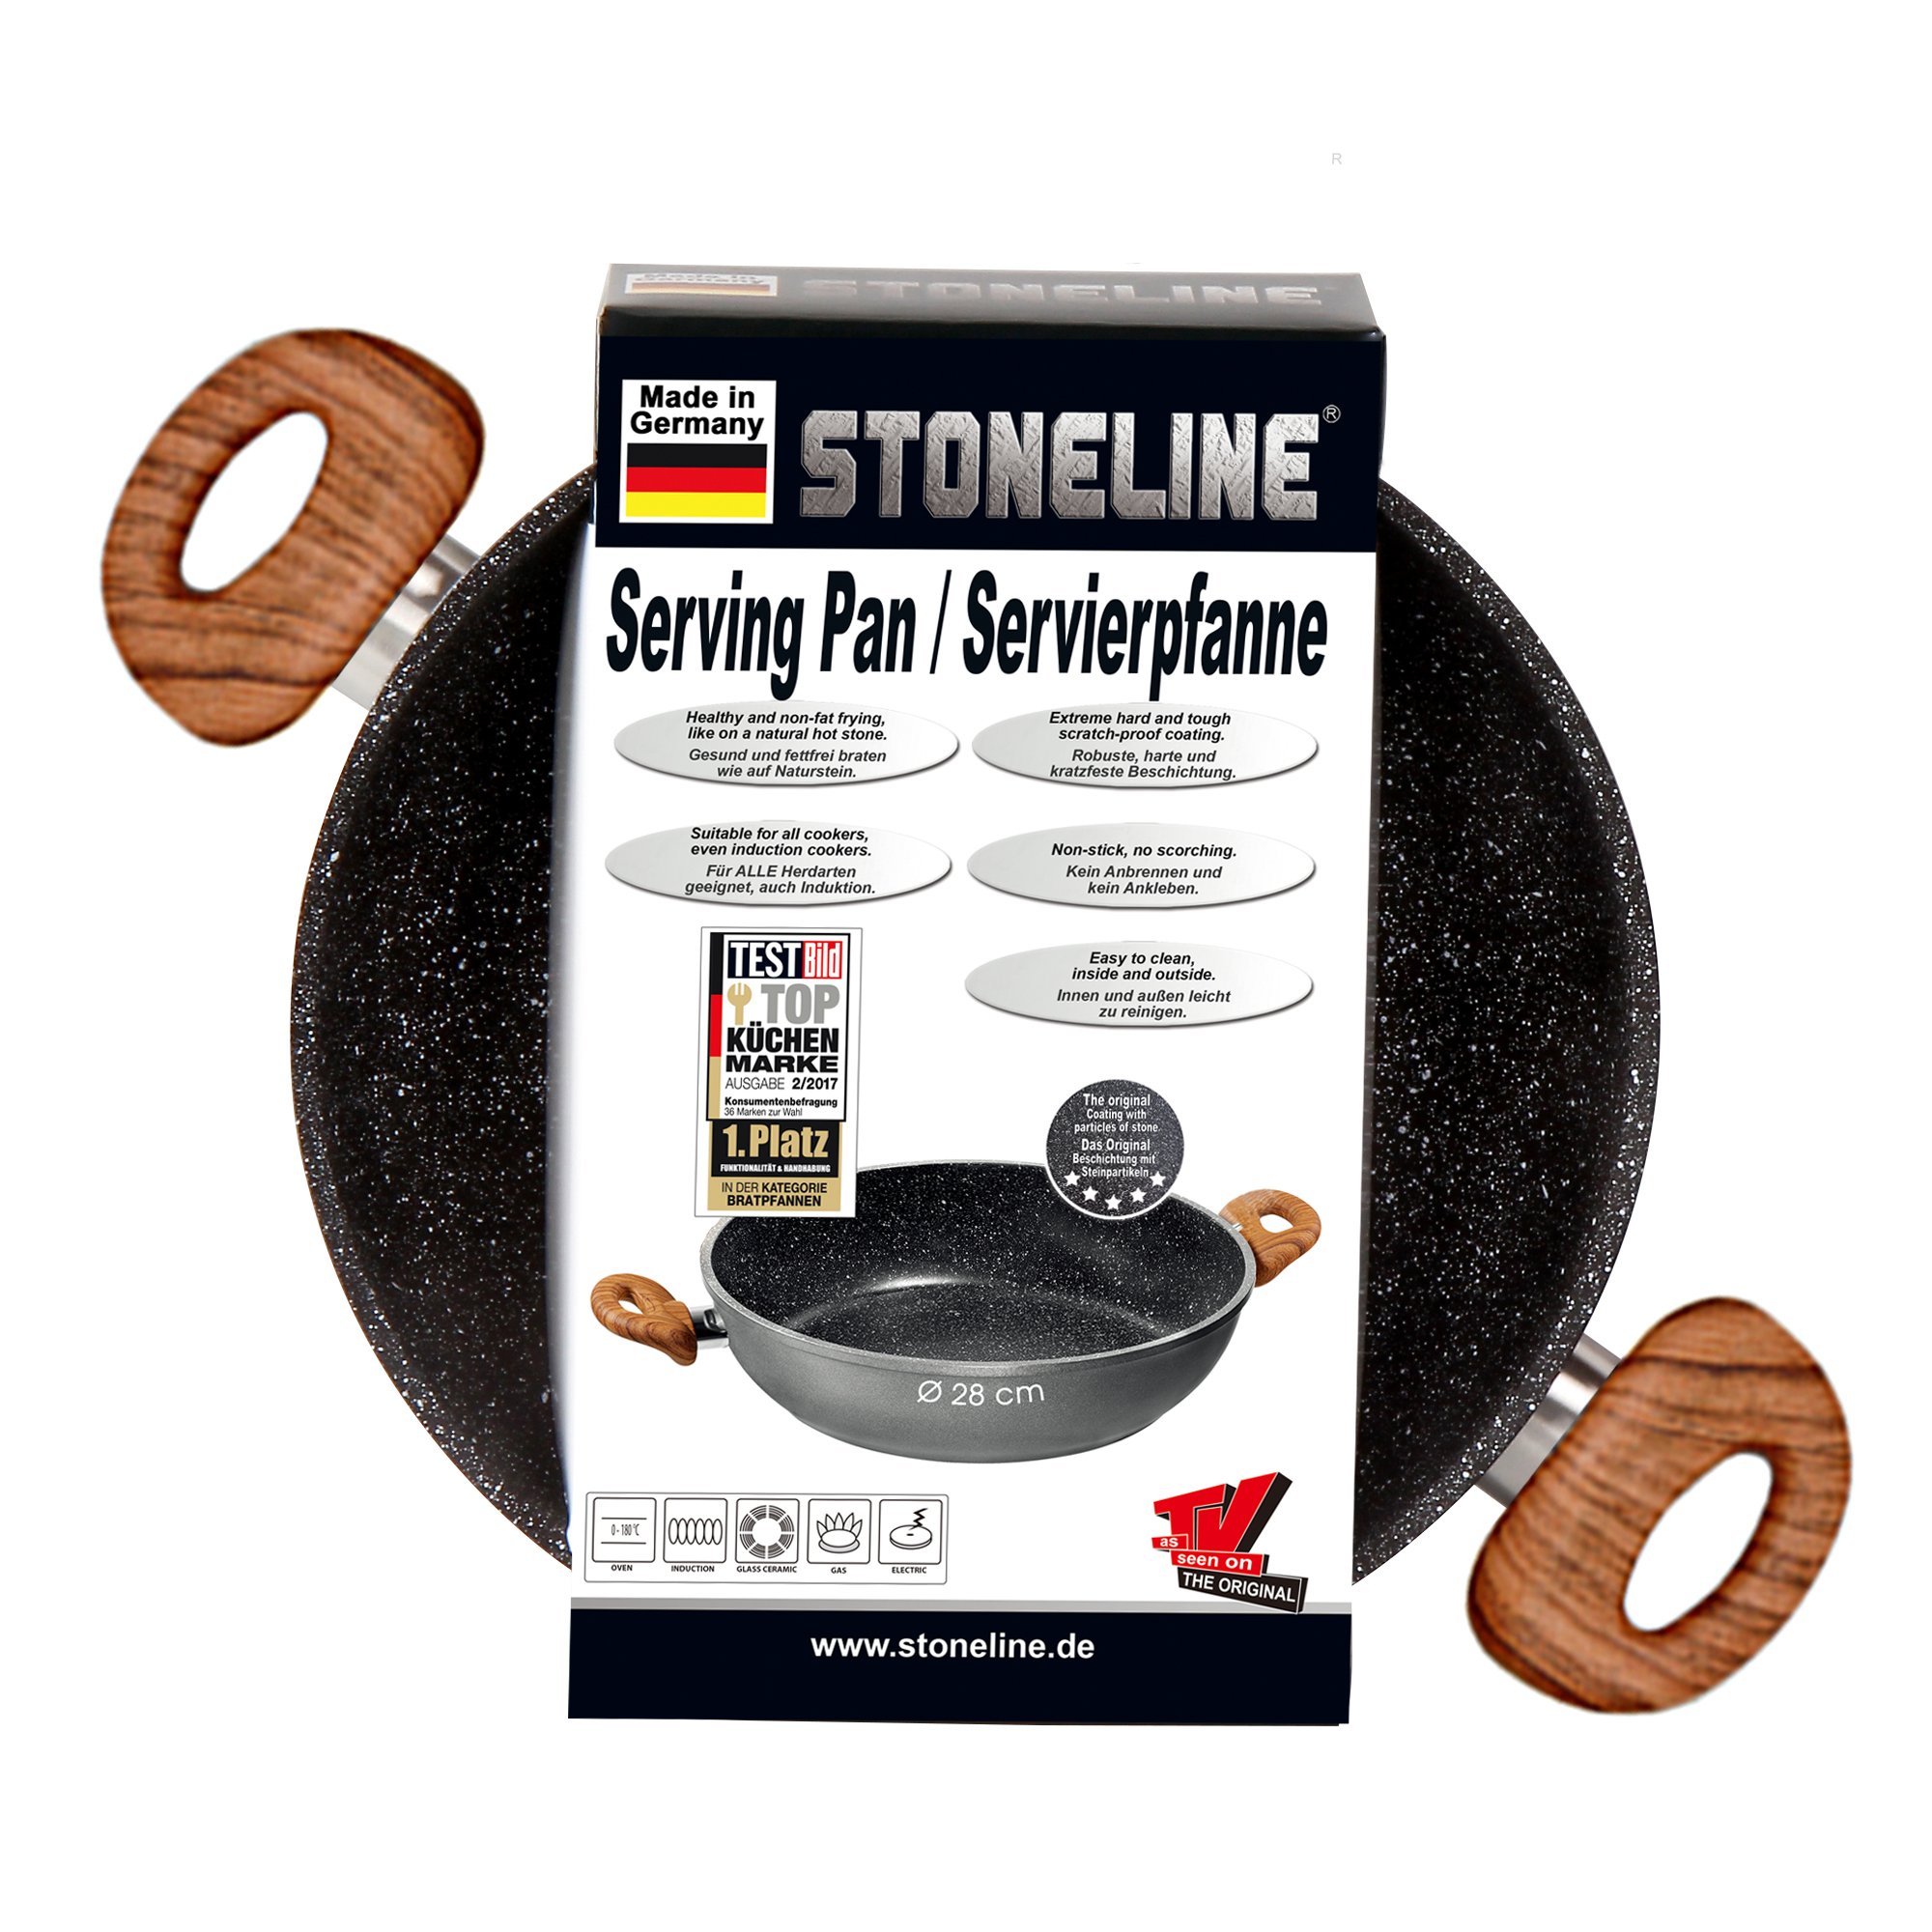 STONELINE® Serving Pan 30 cm, Non-Stick | Made in Germany Wood Design, Back to Nature